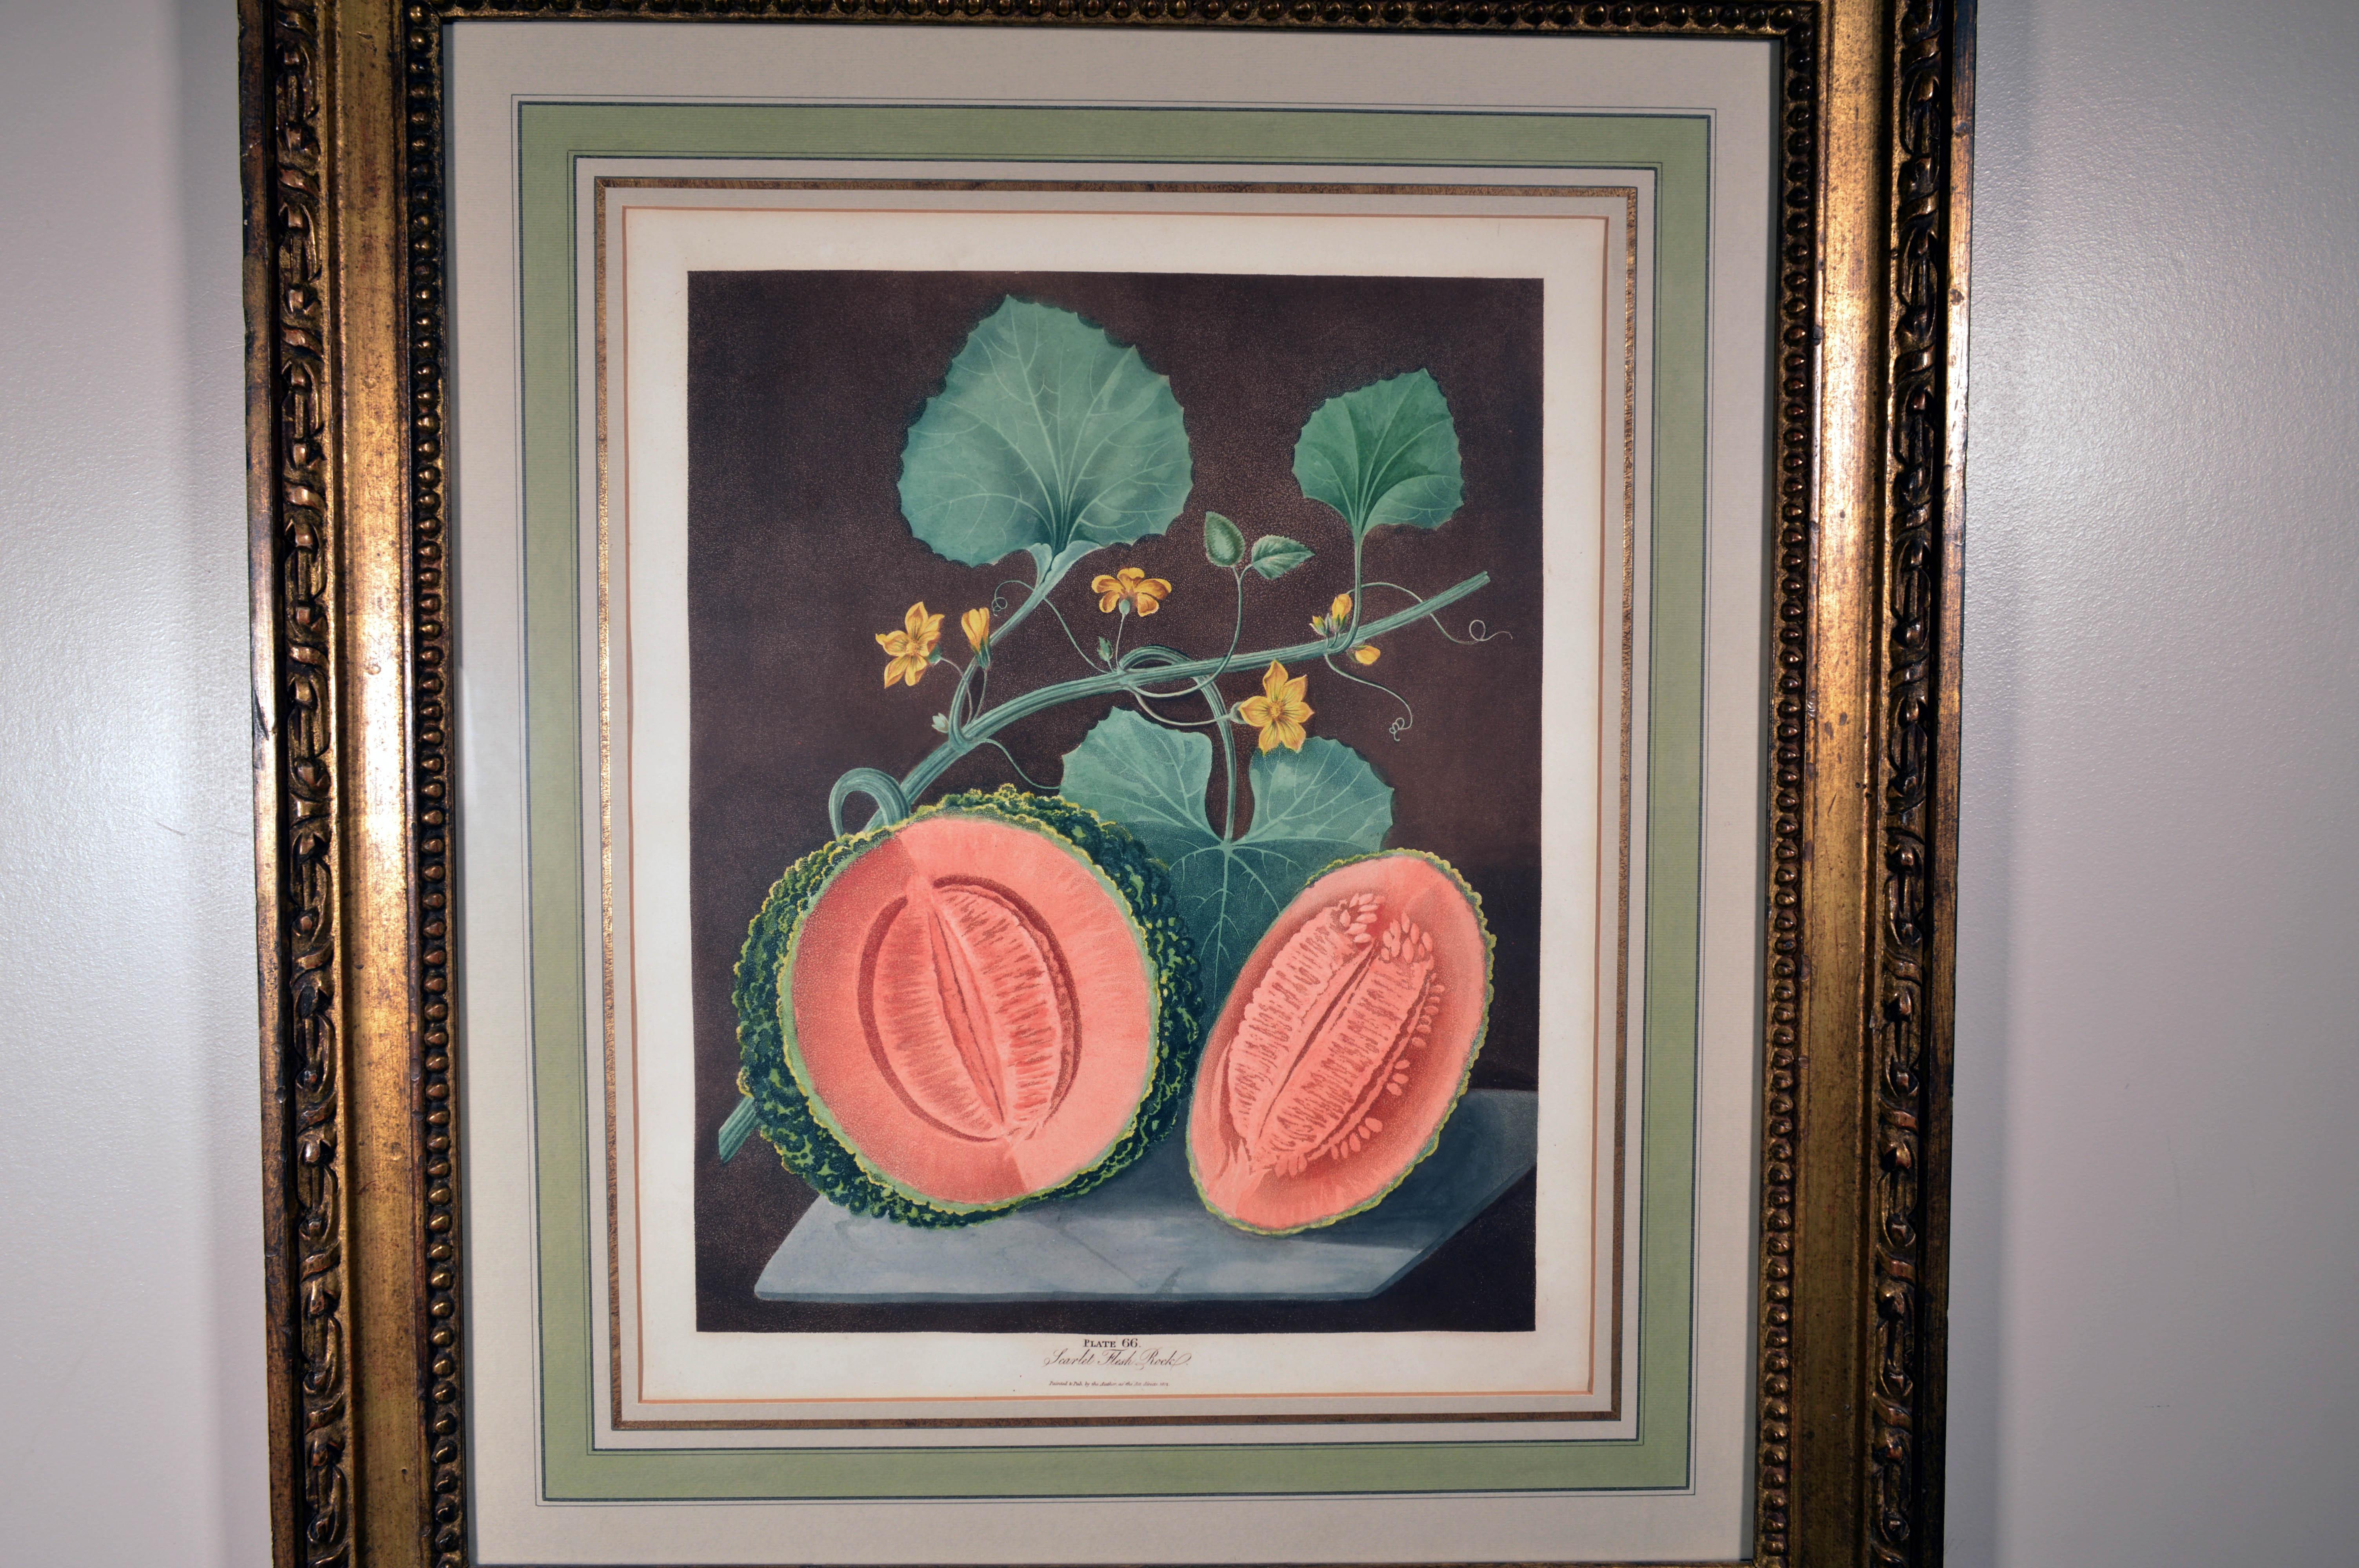 Paper George Brookshaw Pair of Engravings of Melons, Plates 66 and 67